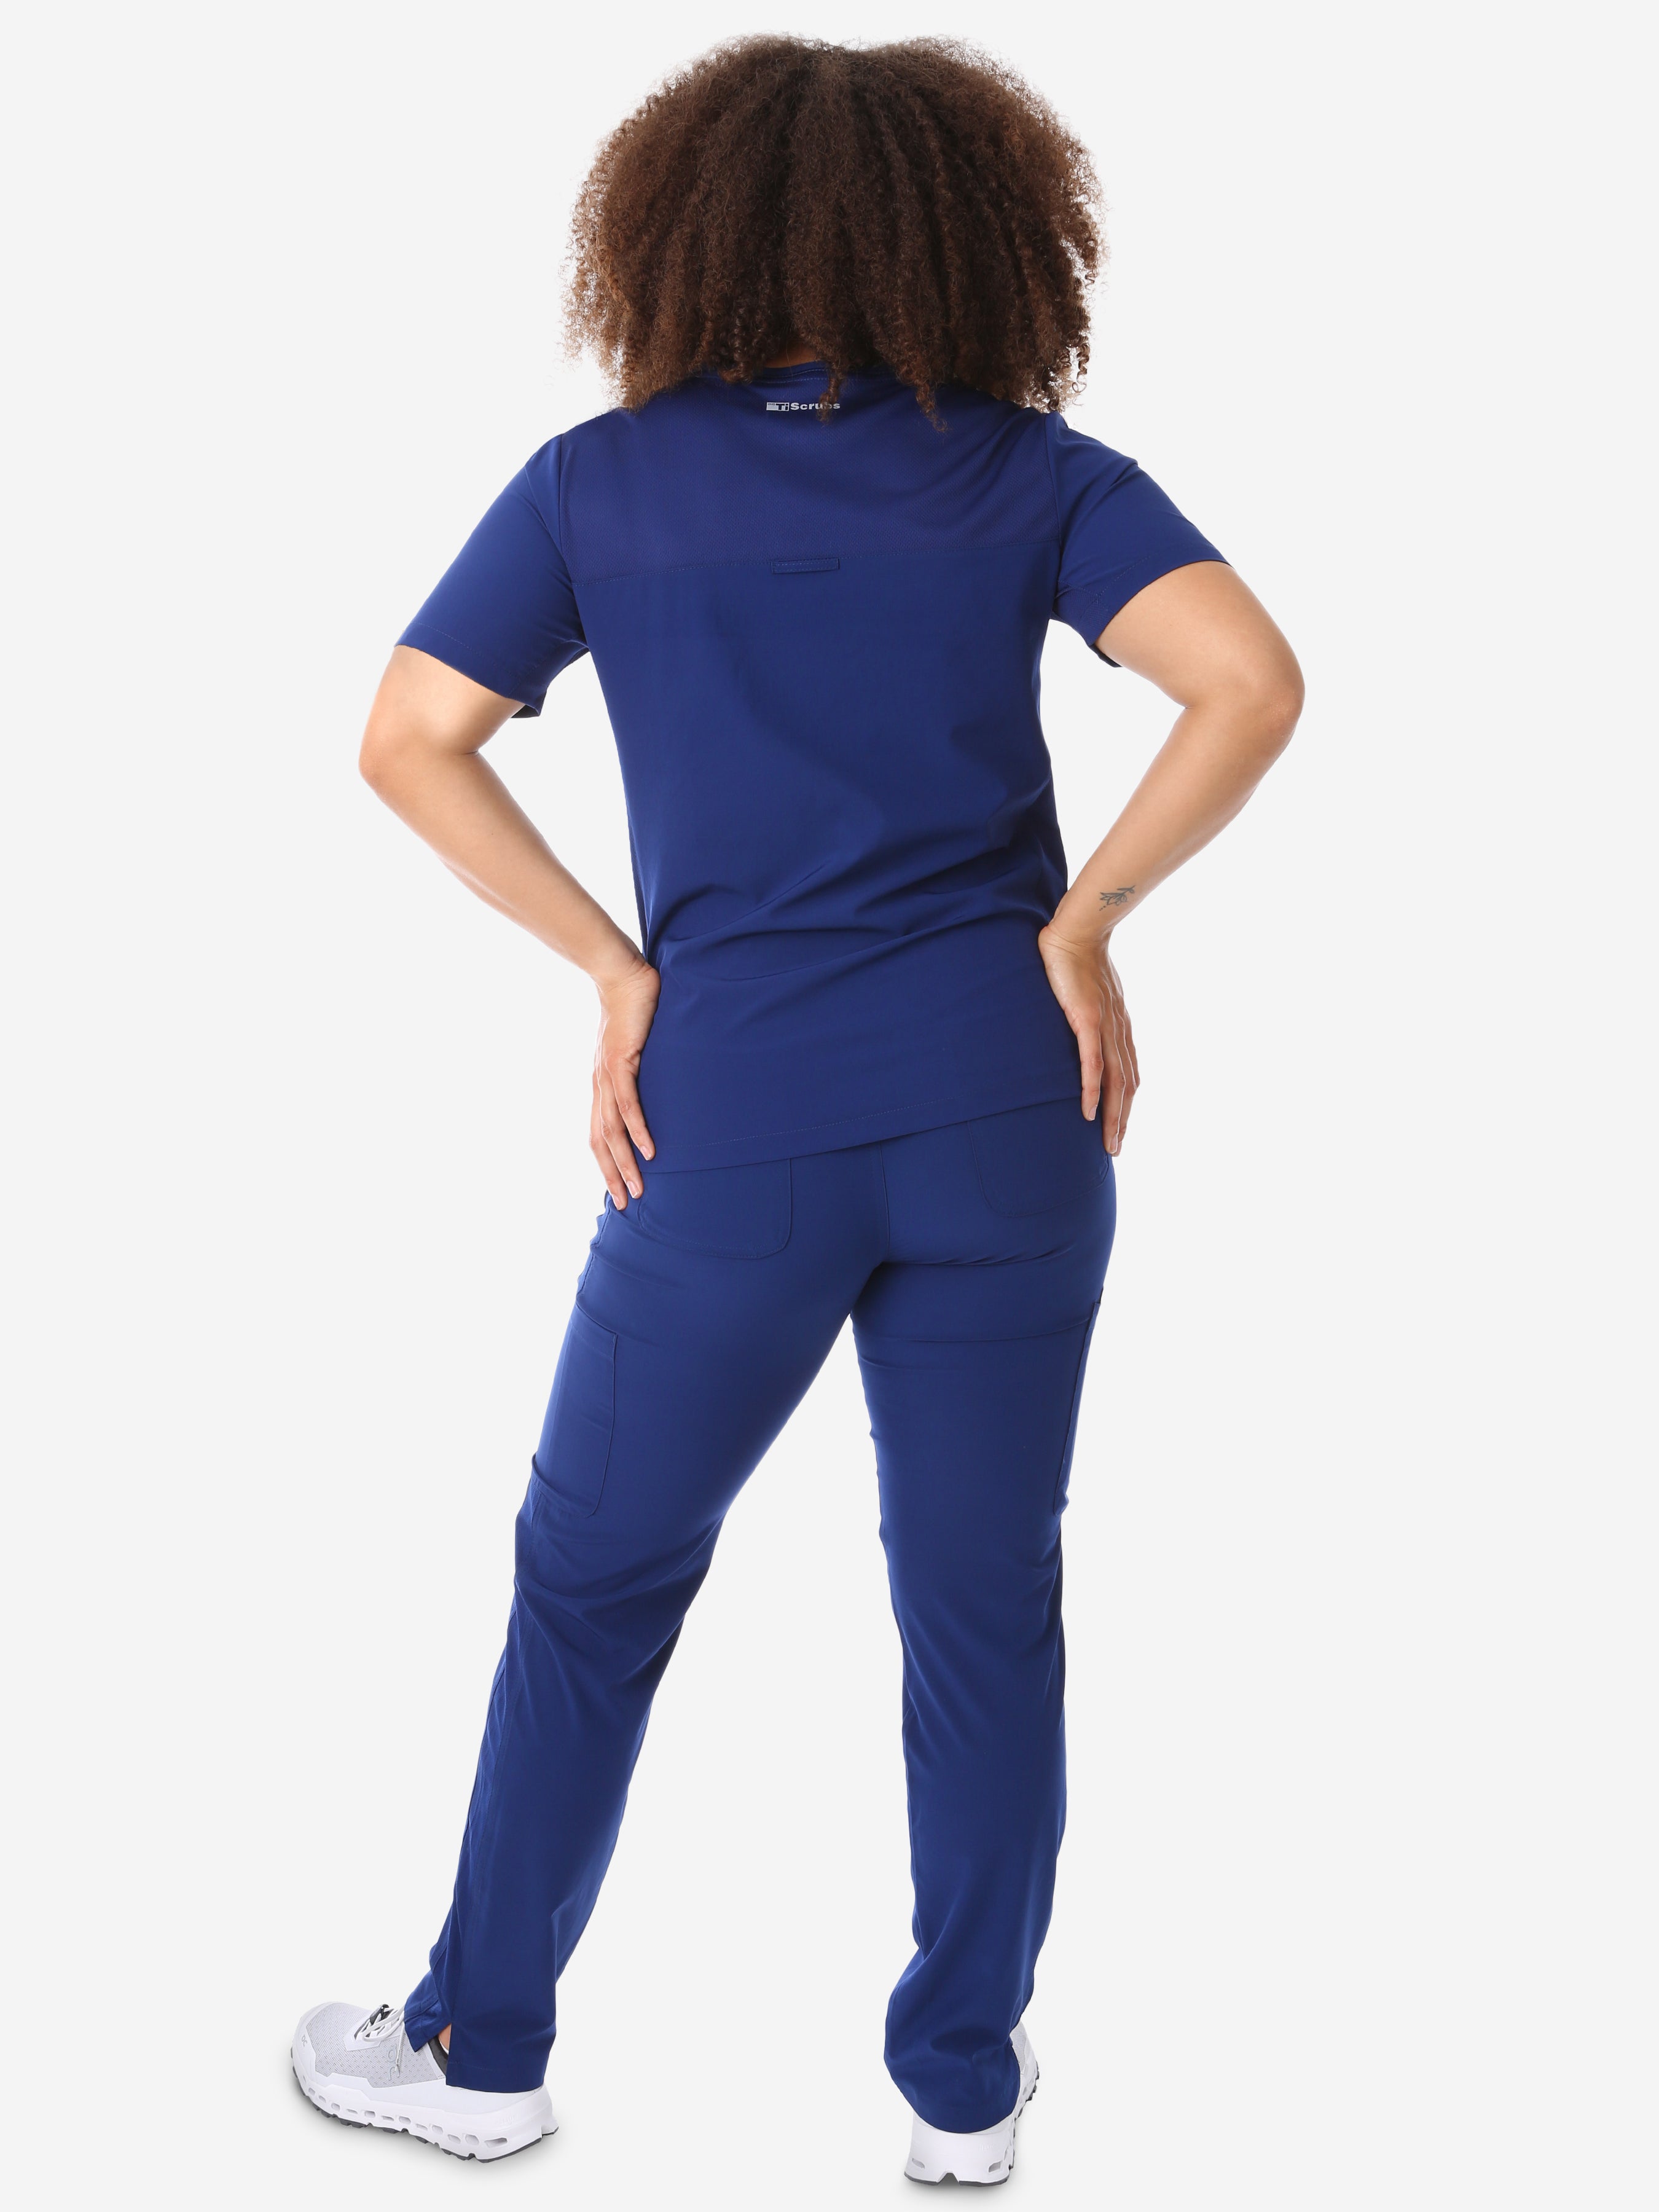 Women's Four-Pocket Scrub Top Navy Blue Full Body Back  View with 9-Pocket Pants